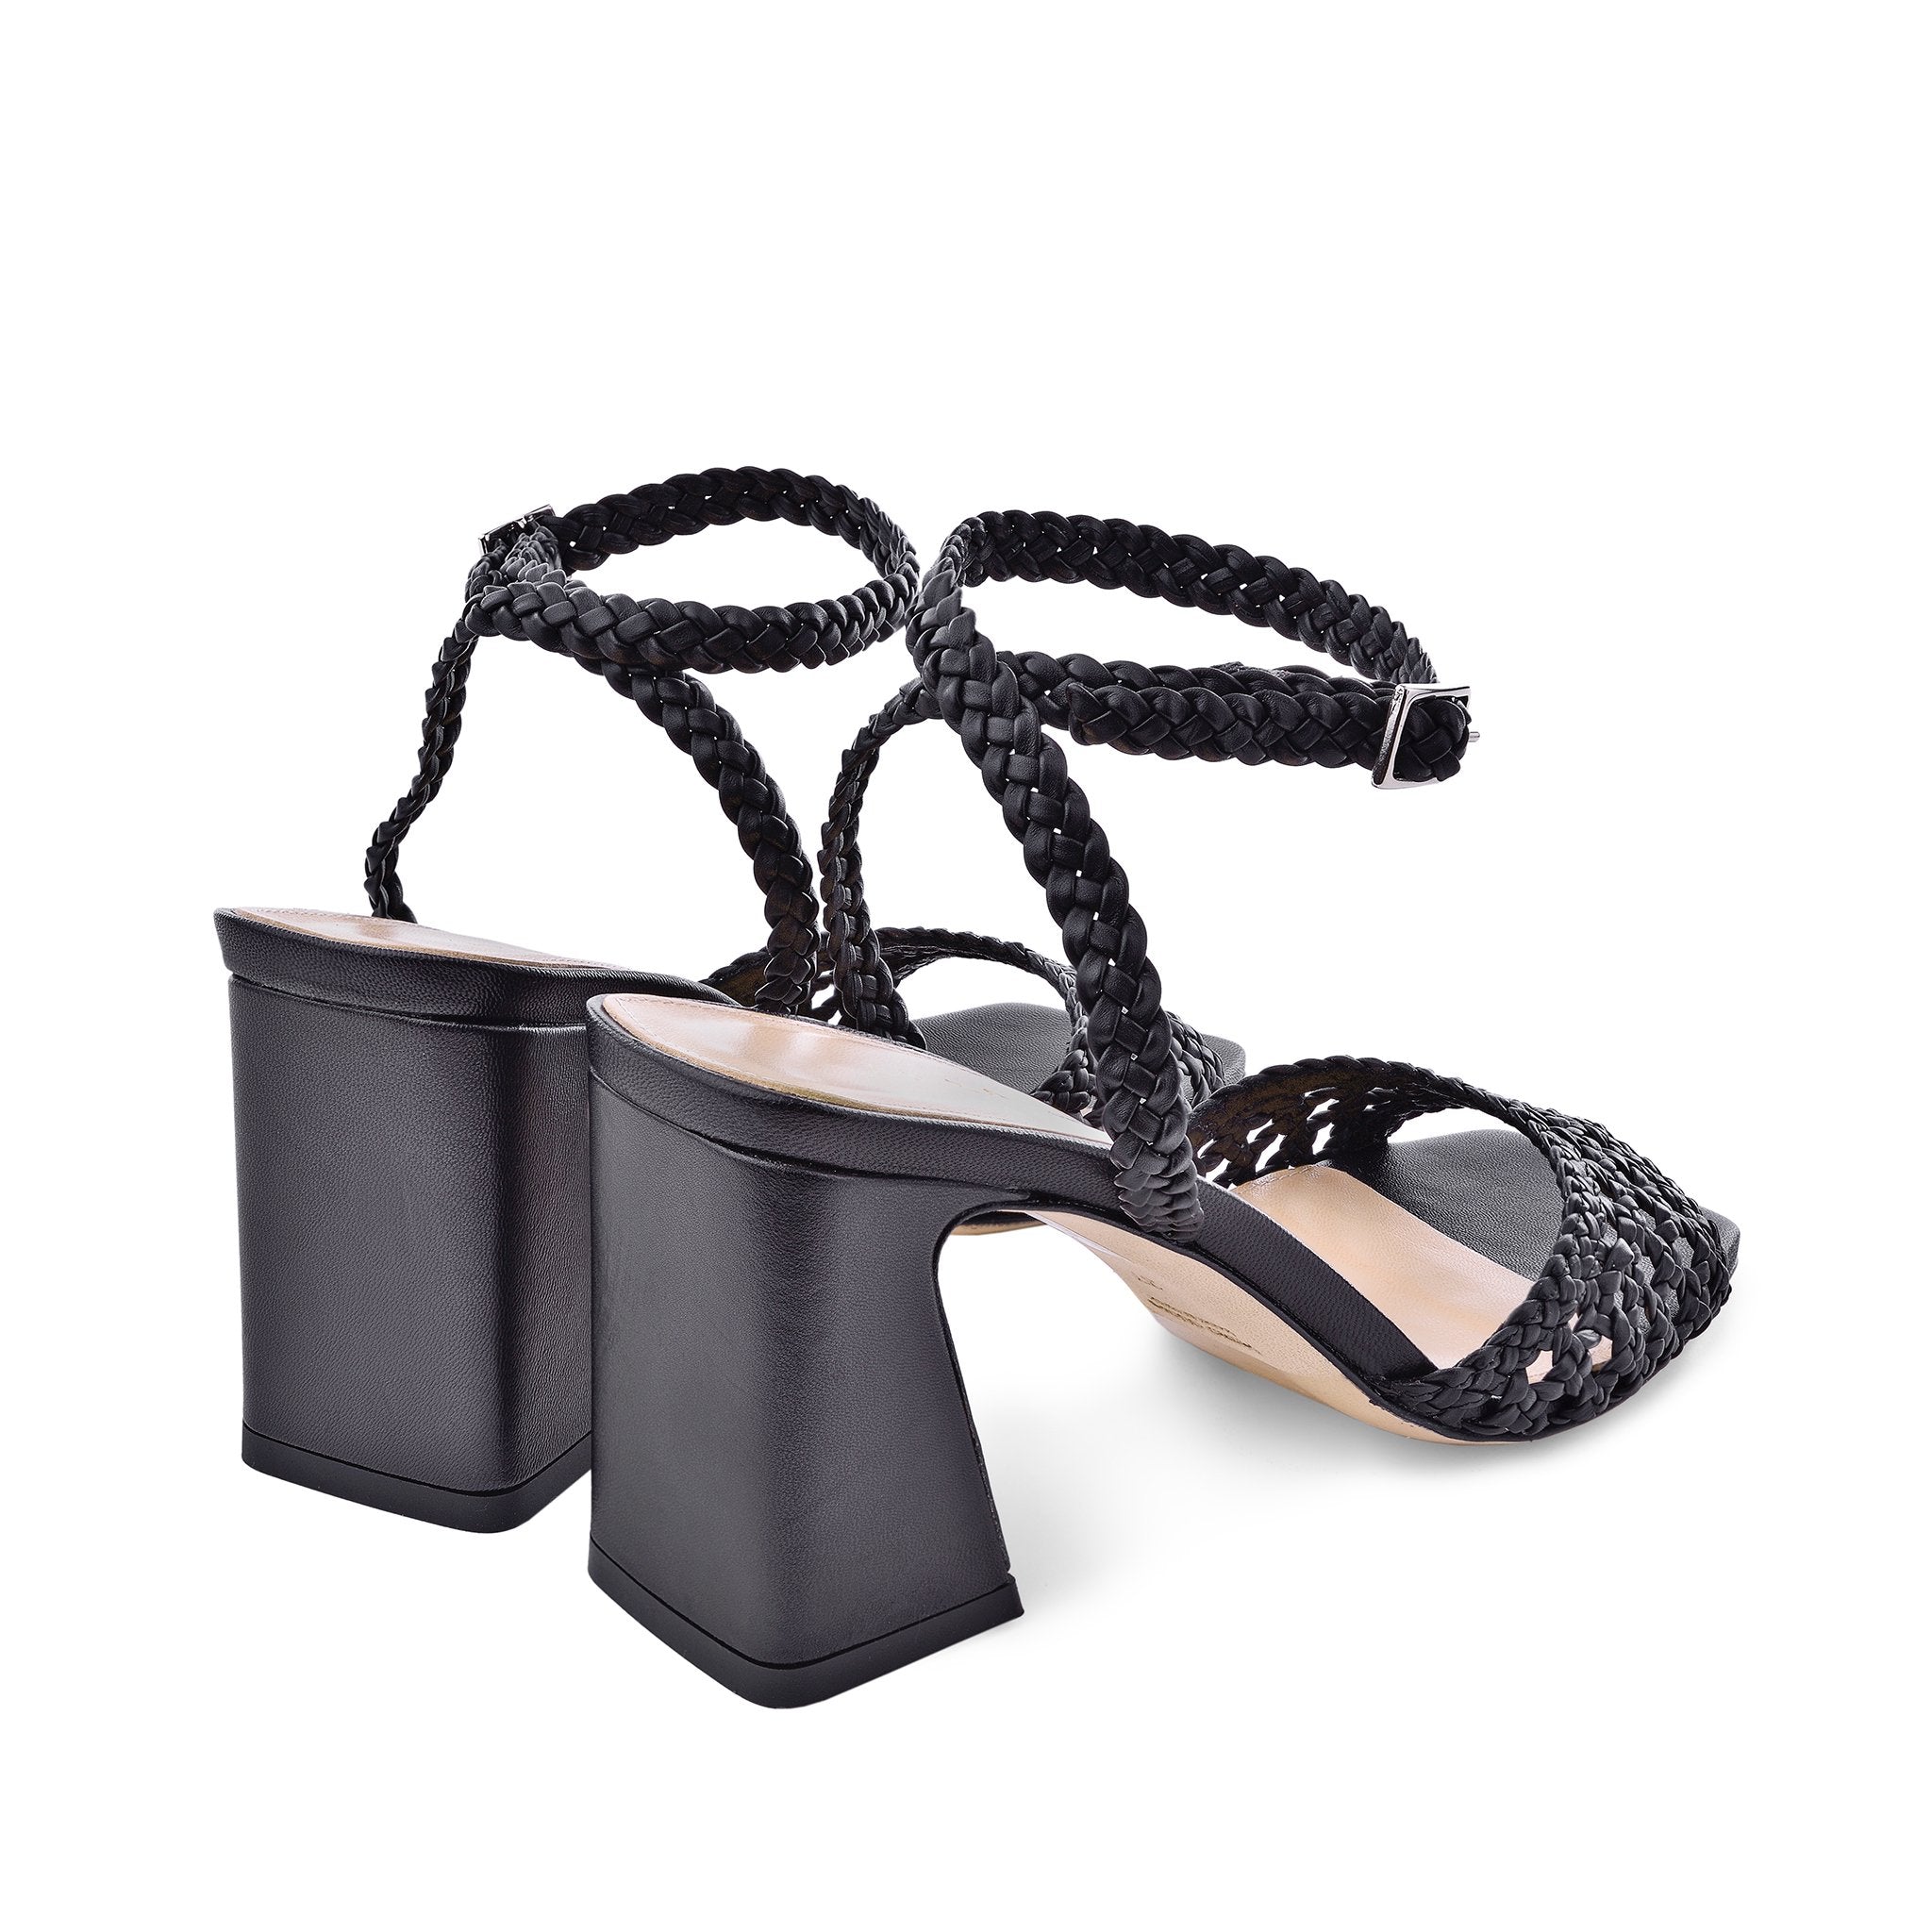 Tama Black Woven Leather Sandals 1418-02 - 6